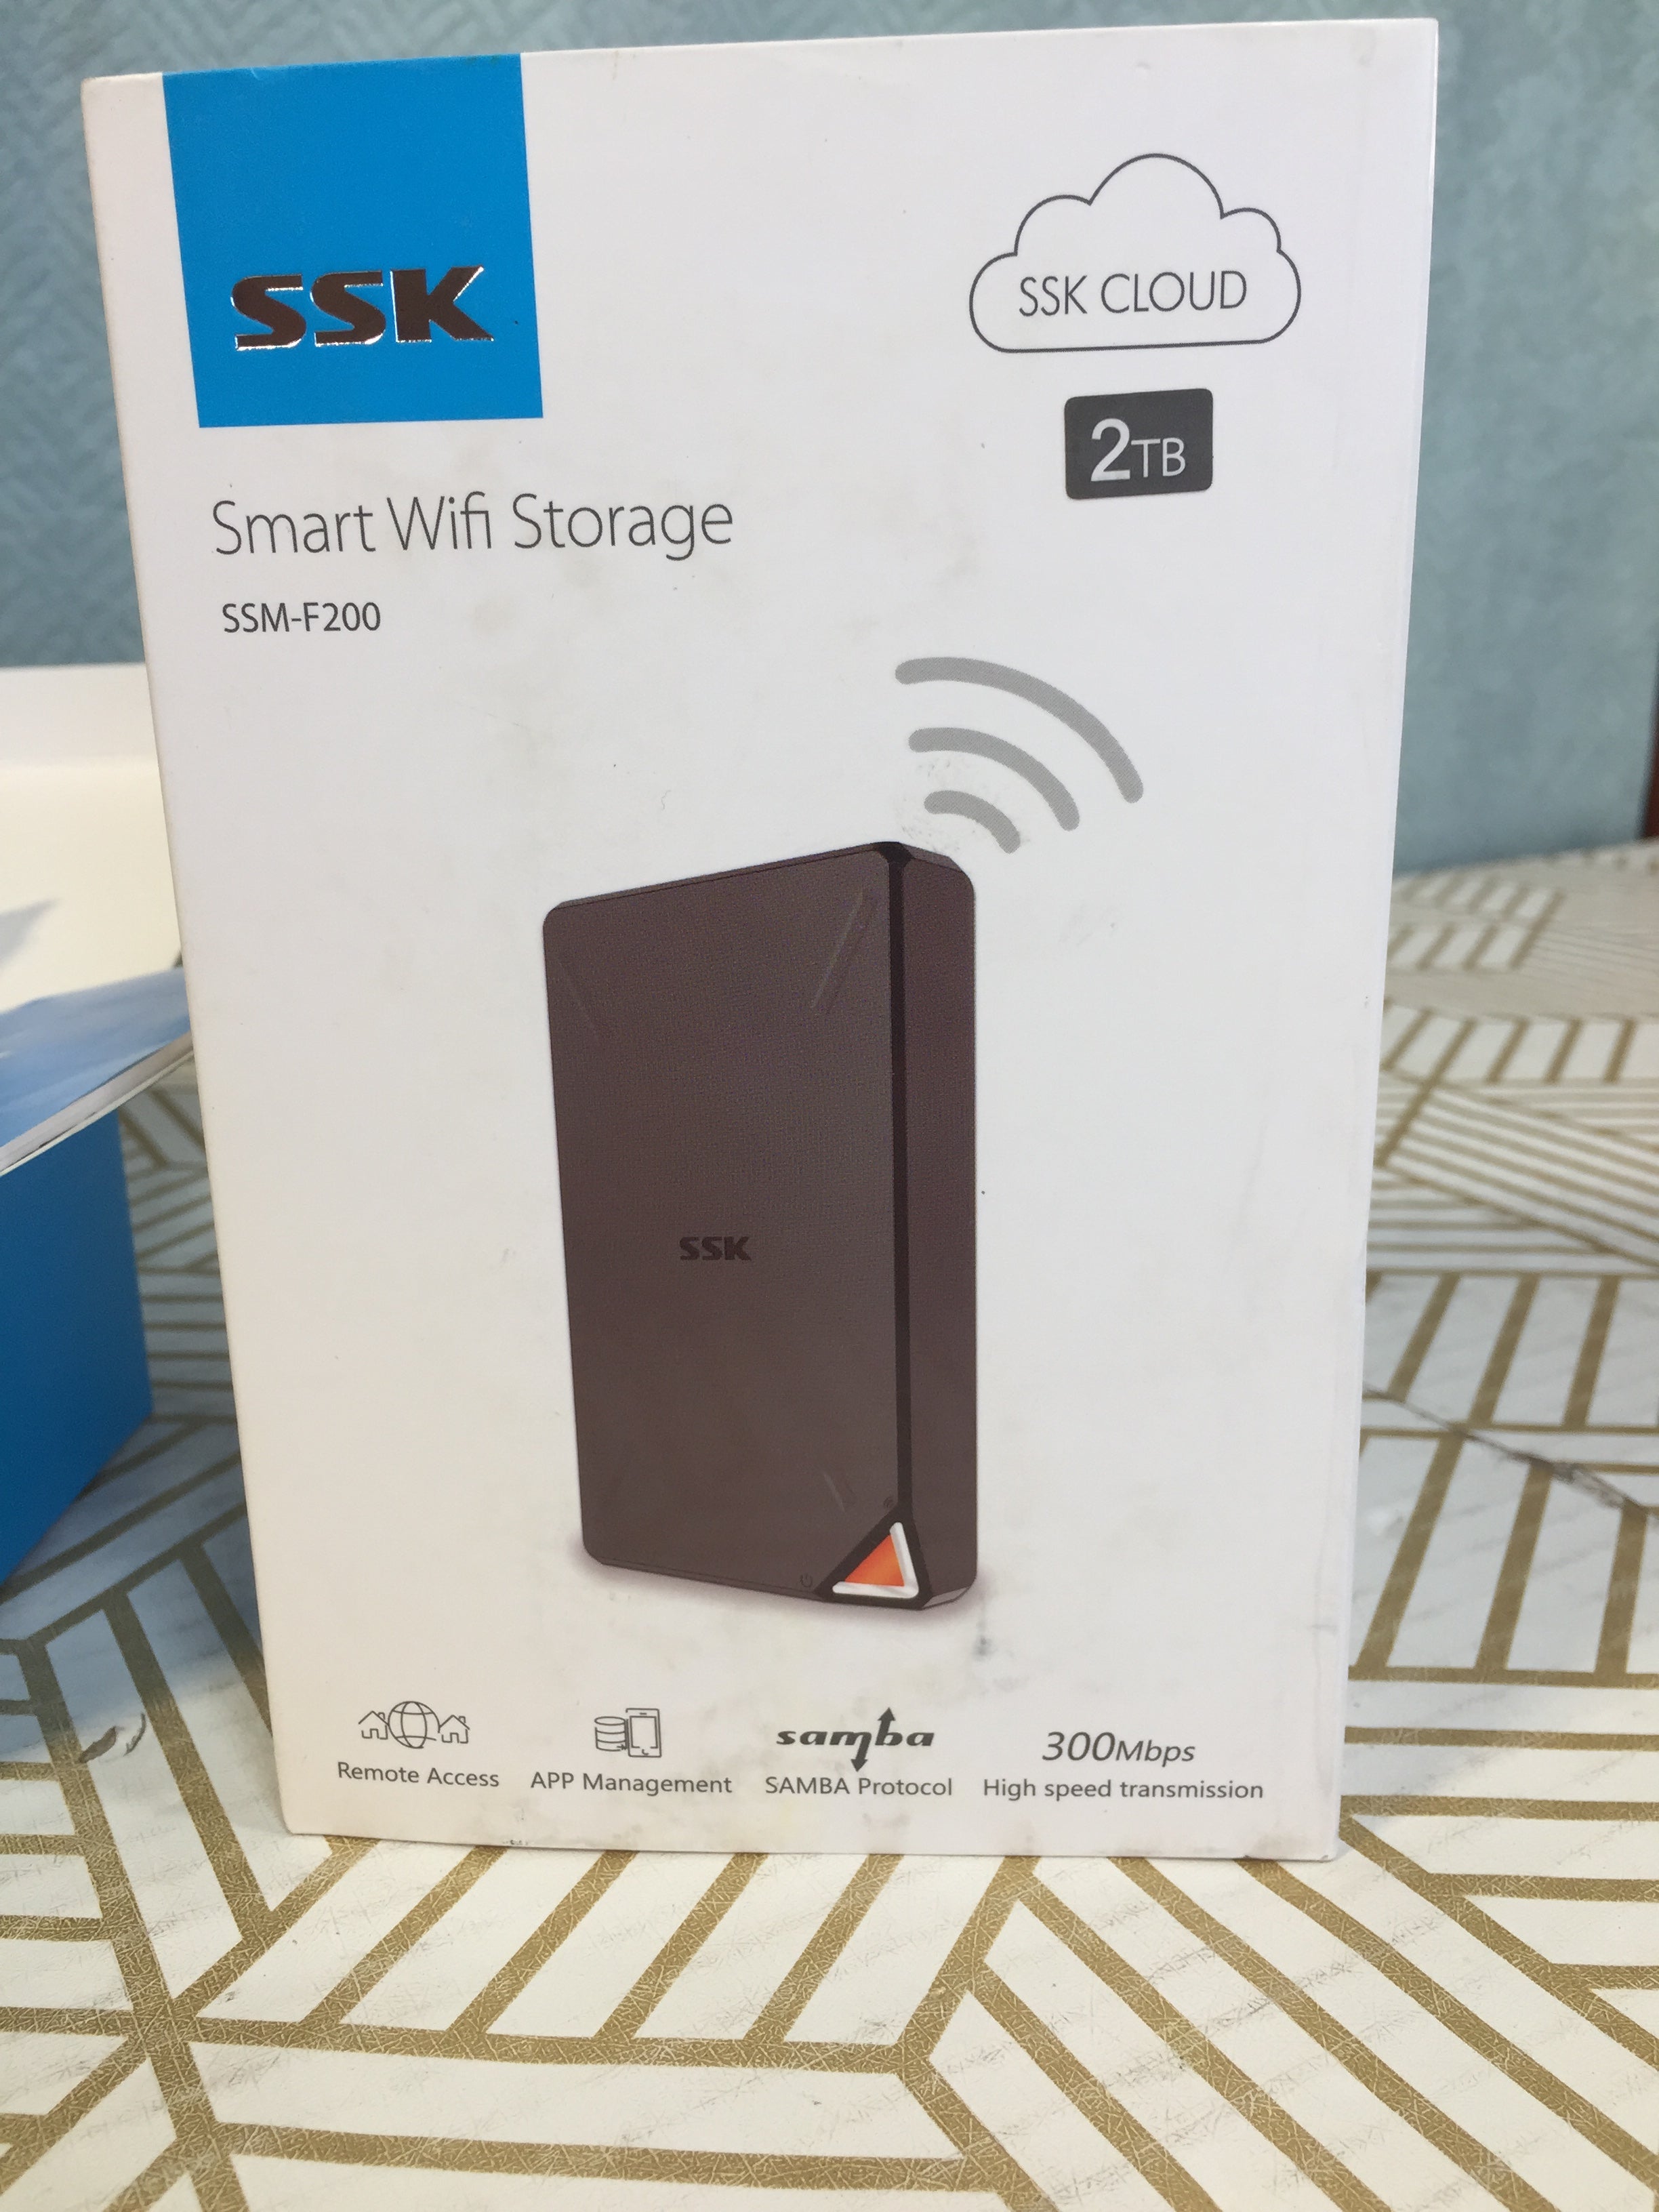 SSK 2TB Portable NAS External Wireless Hard Drive with Own Wi-Fi Hotspot, Personal Cloud Smart Storage Support Auto-Backup, Phone/Tablet PC/Laptop Wireless Remote Access (7957769027822)